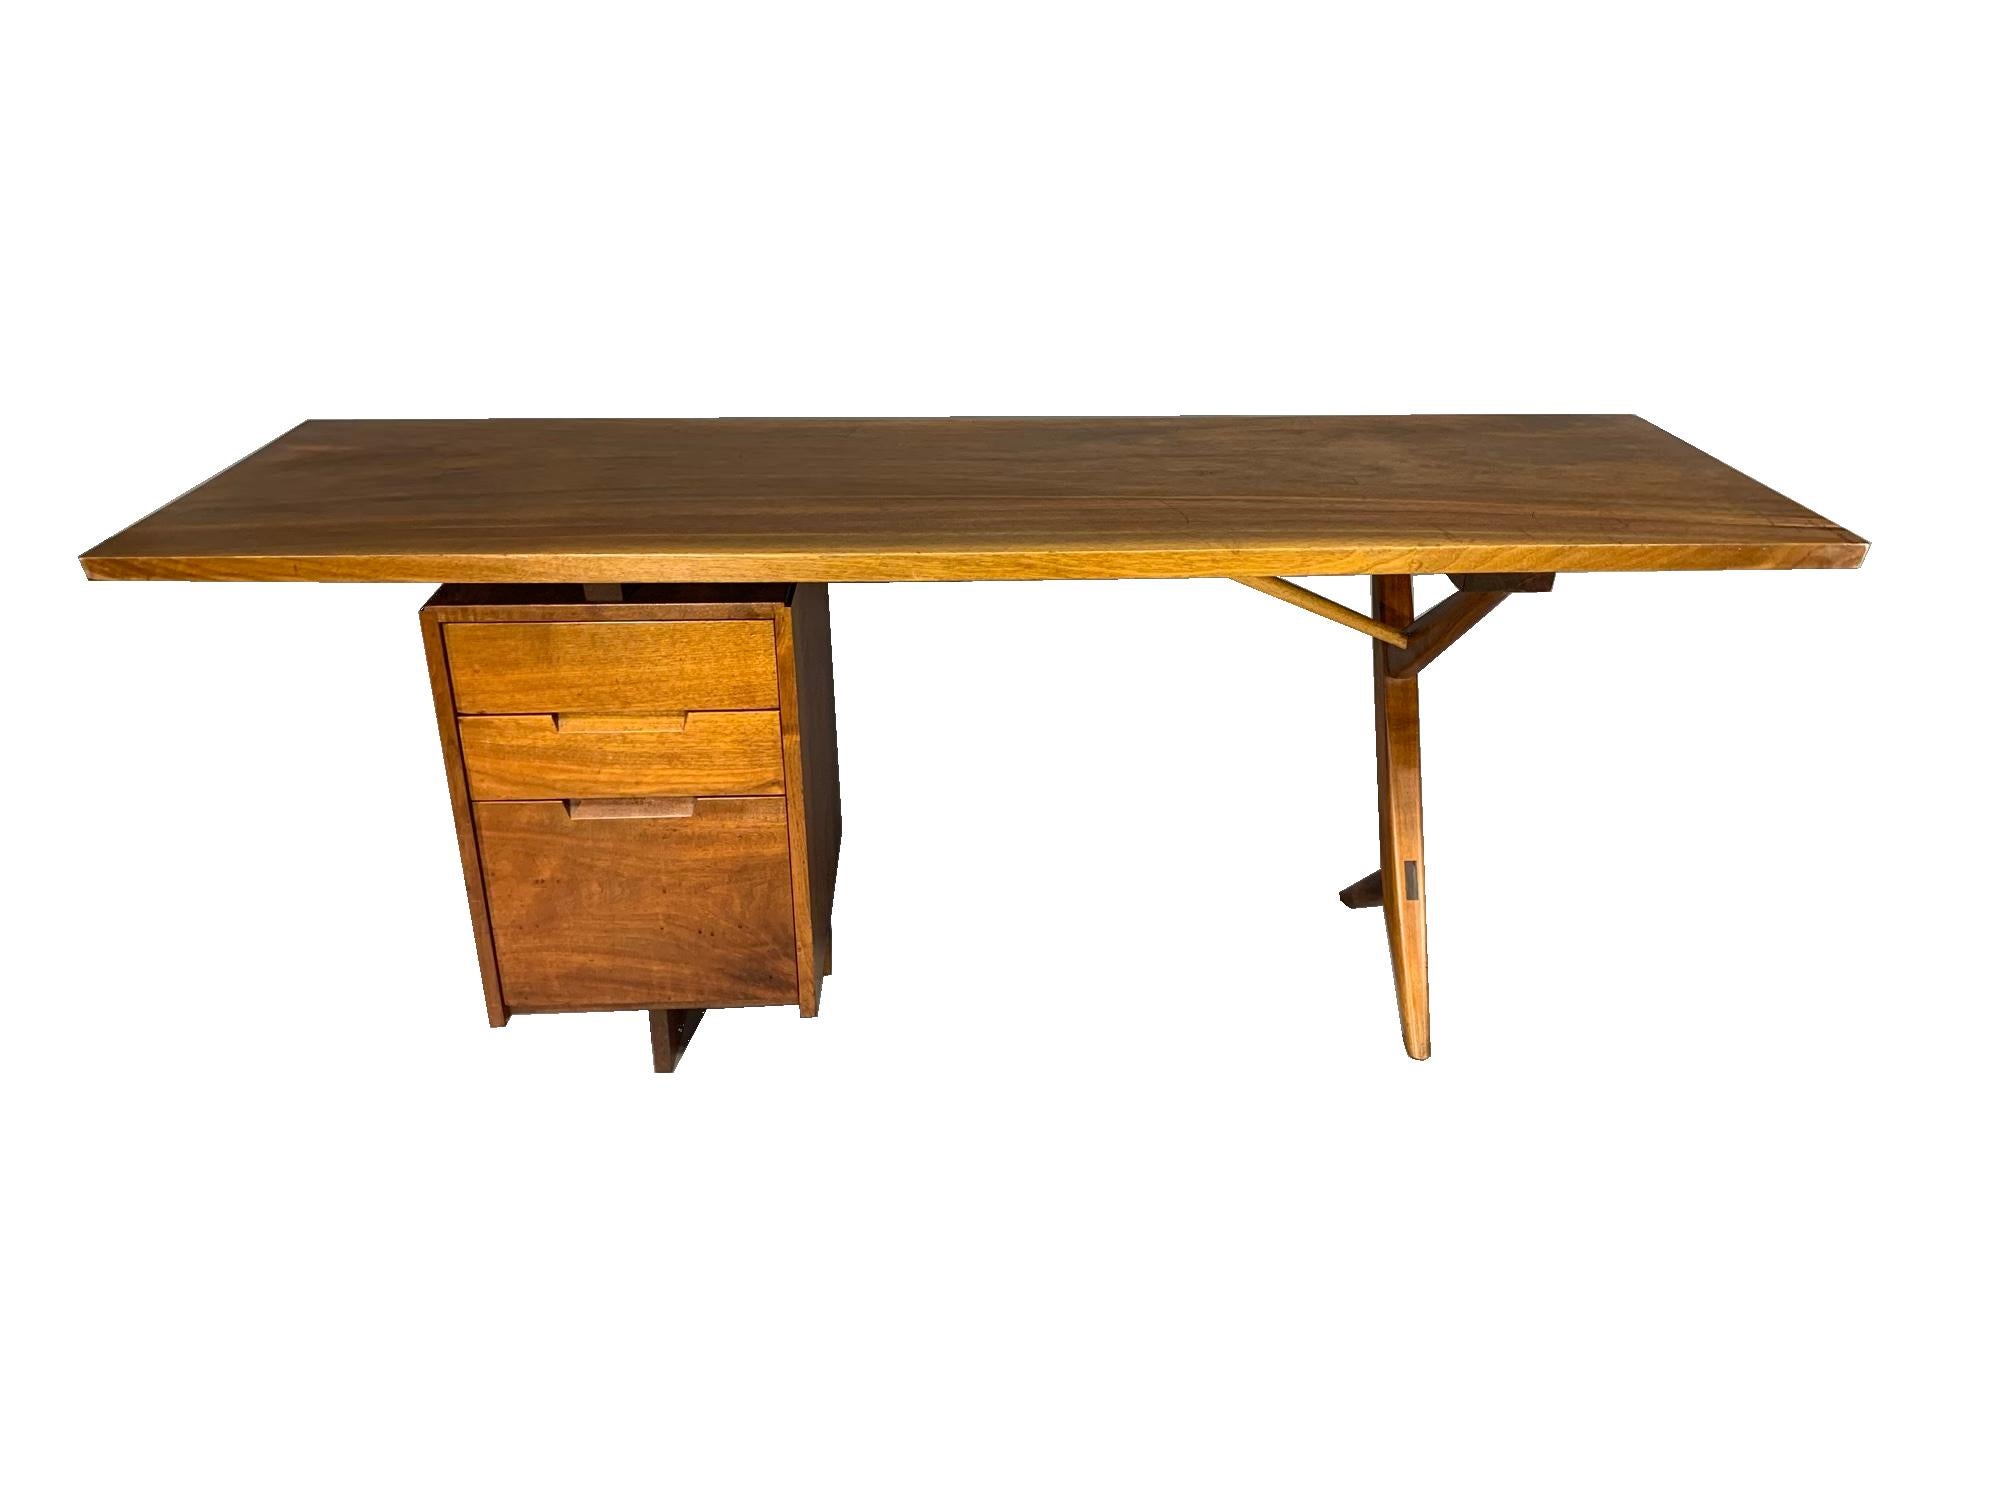 Writing desk circa late 1950s-early 1960s, made by George Nakashima (1905-1990), New Hope, Pennsylvania, American black walnut and hickory, “Conoid” style, having plank top with slight serpentine finished edge; with three-drawer pedestal to one end,